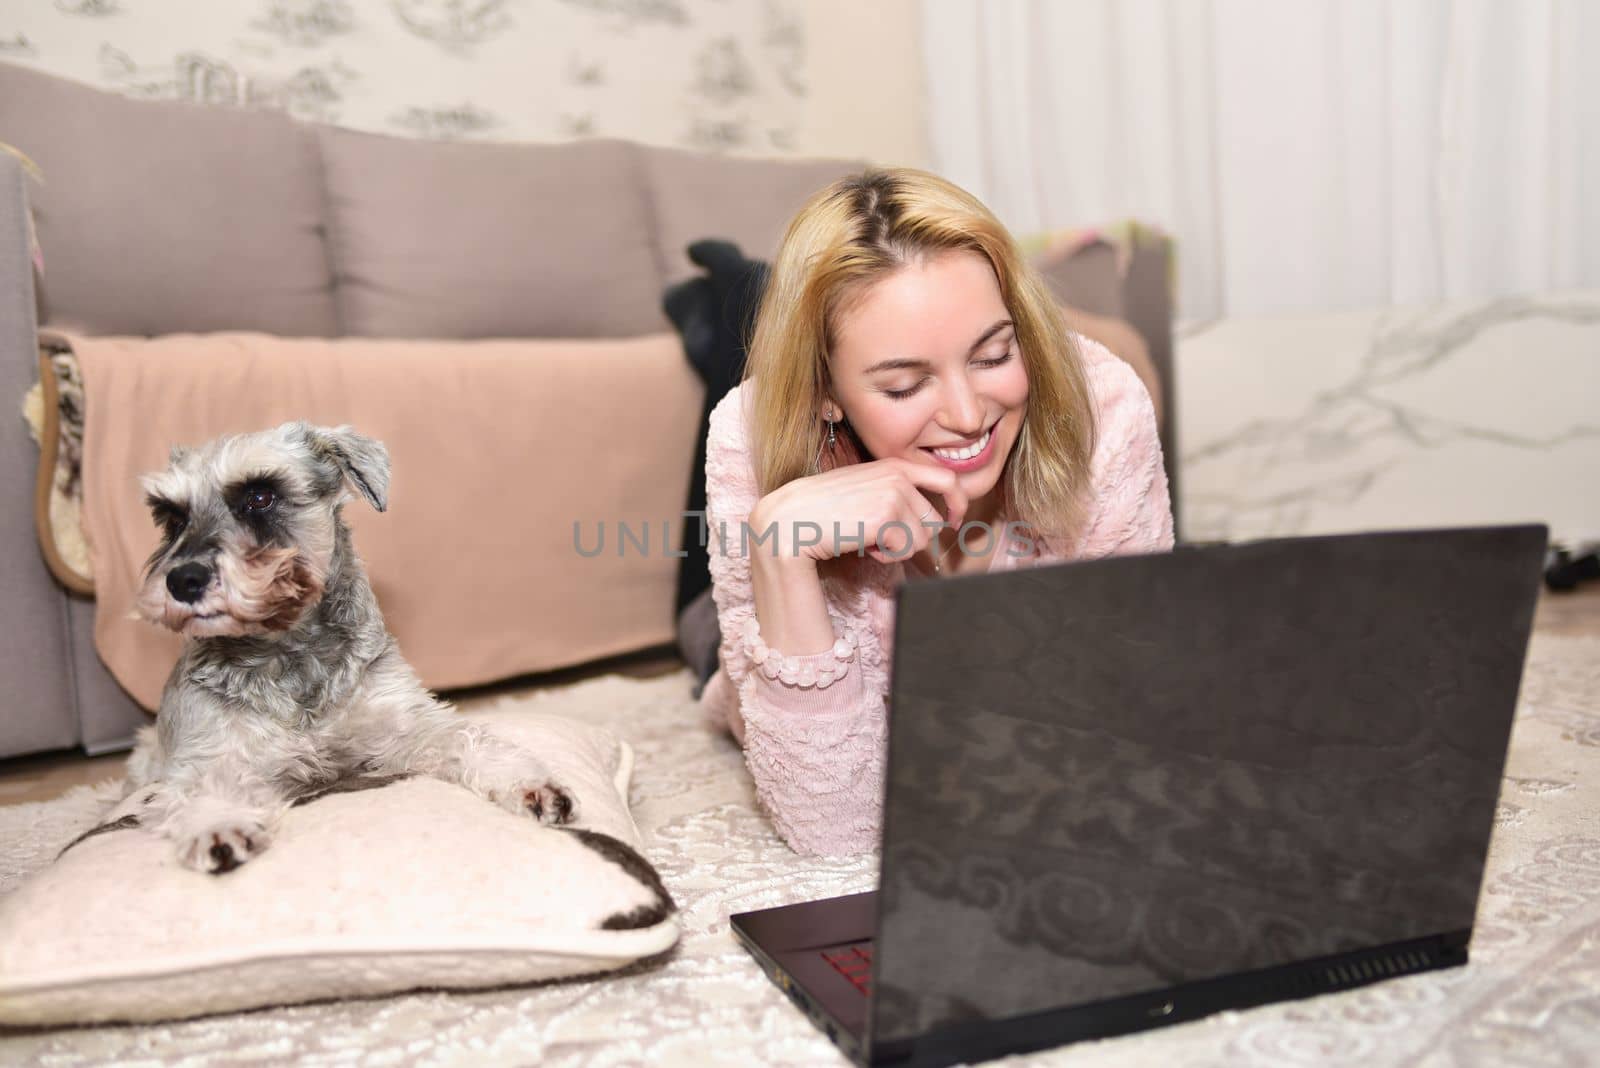 Young blonde woman is laughing at home with dog while chatting with someone through a video call on a laptop.